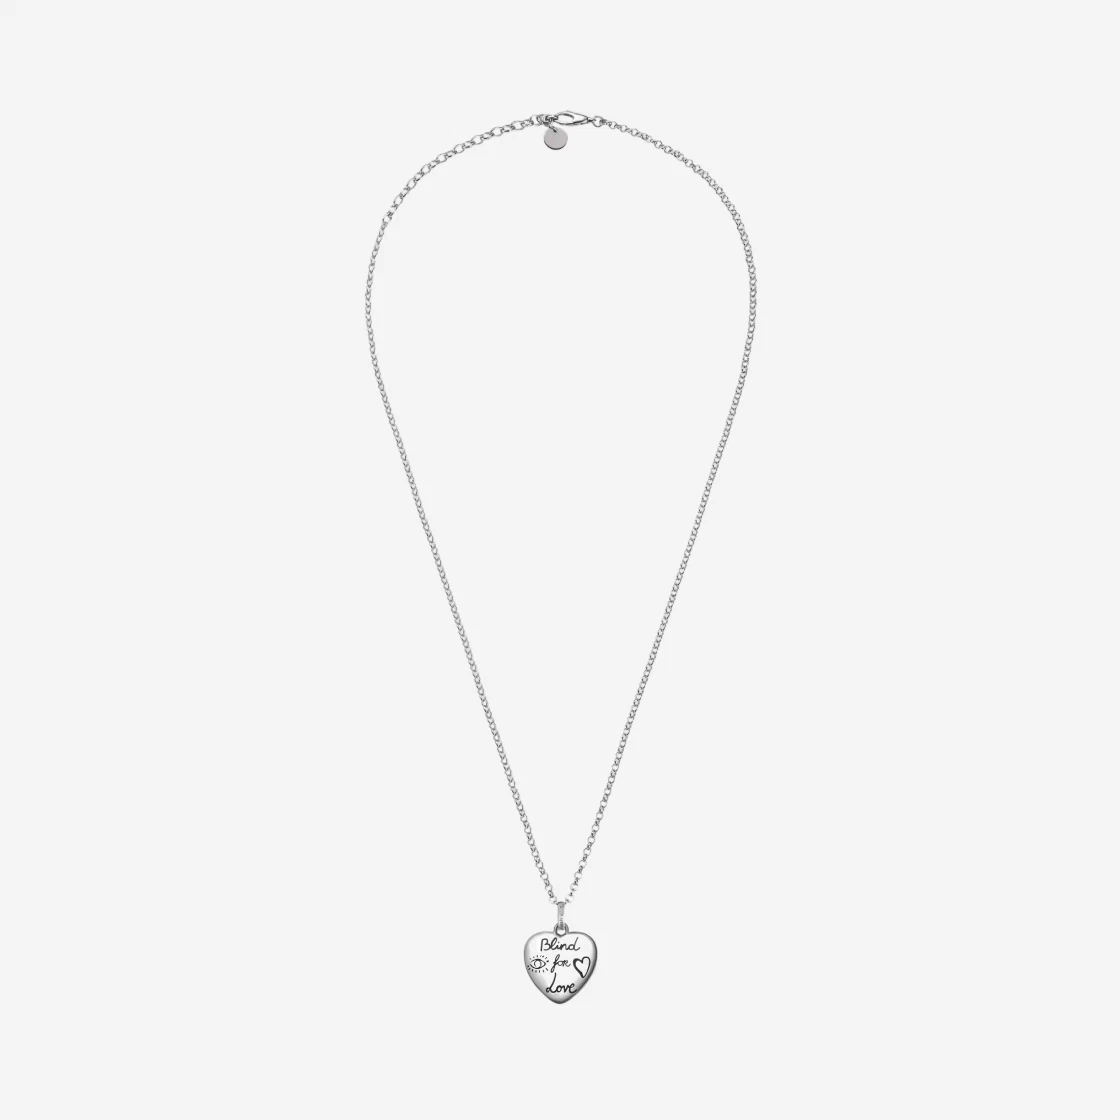 Gucci Blind for Love Necklace Silver